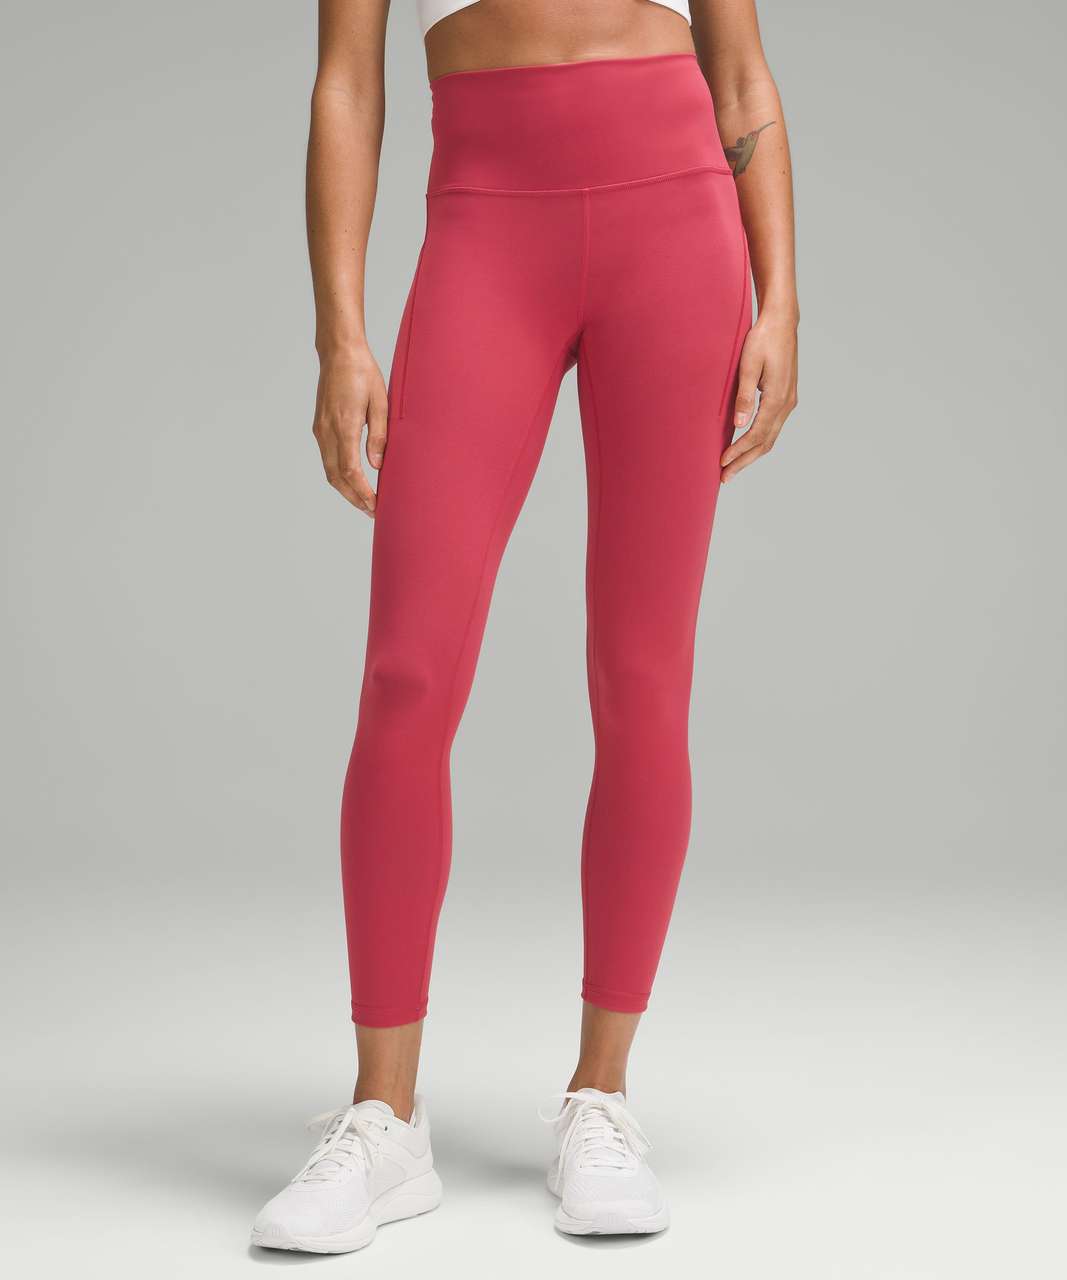 Wunder Train High-Rise Tight with Pockets 25, Twilight Rose